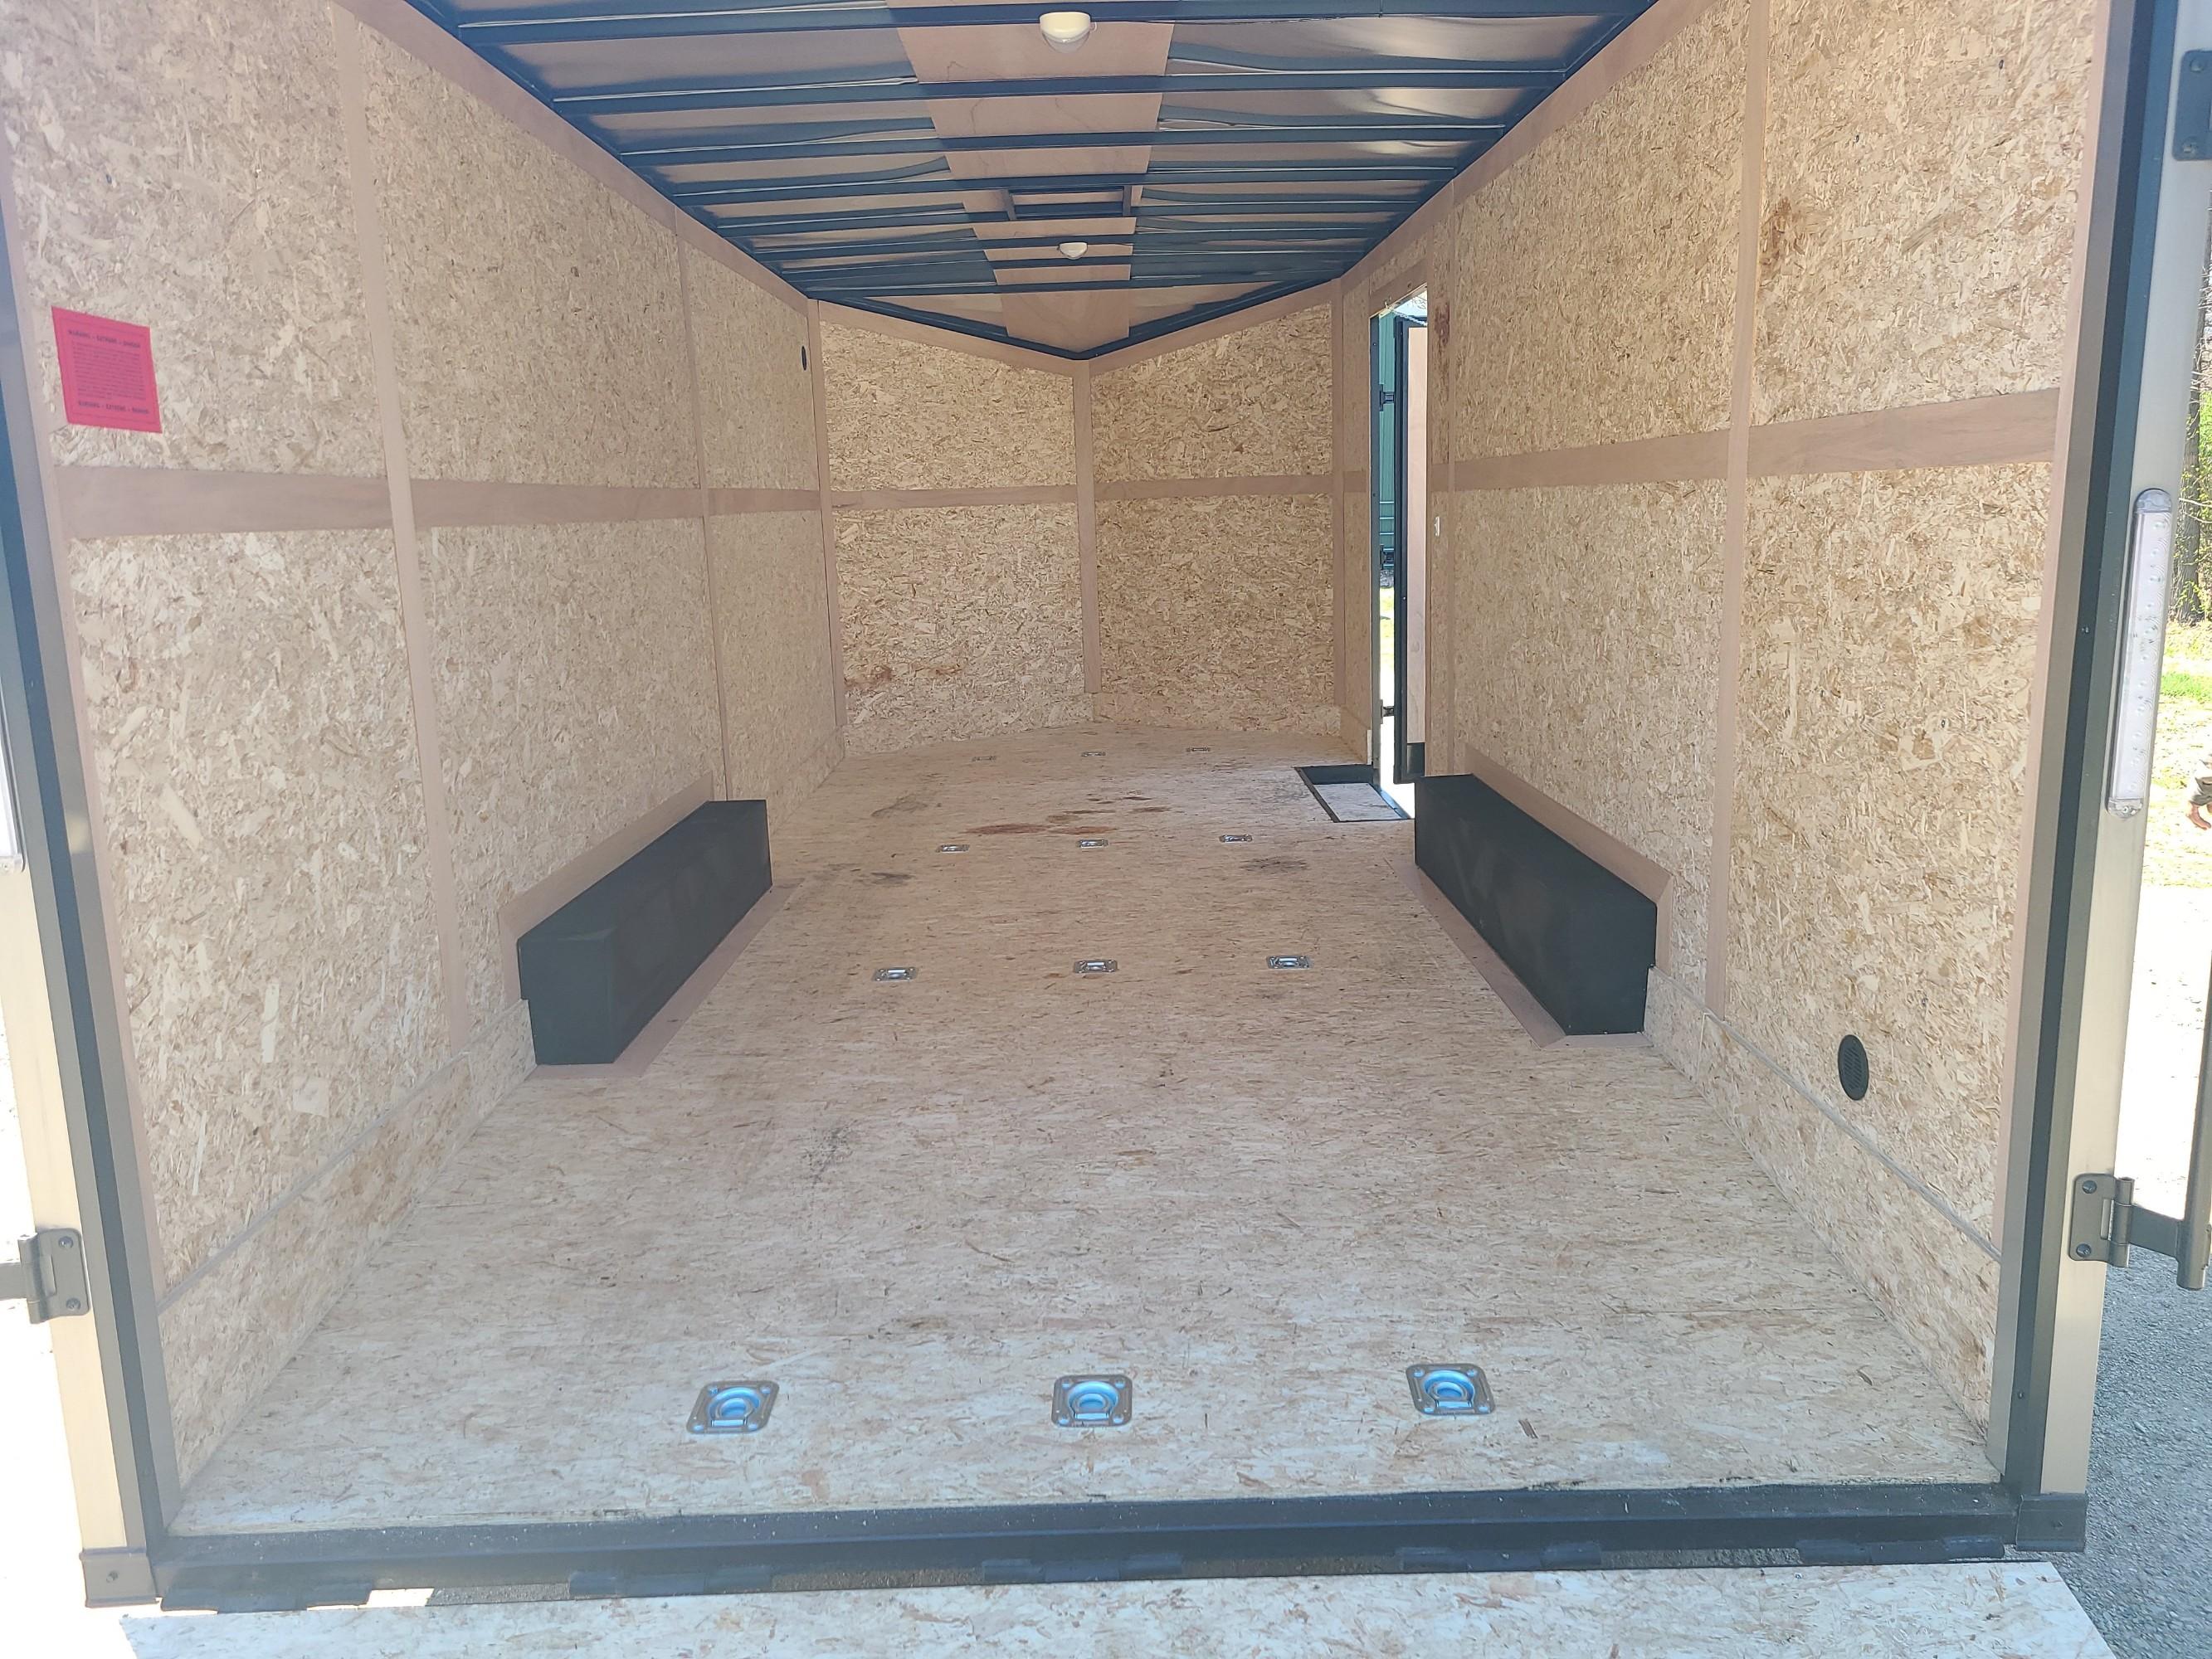 2023 23' Stealth Dual Axel Enclosed Trailer